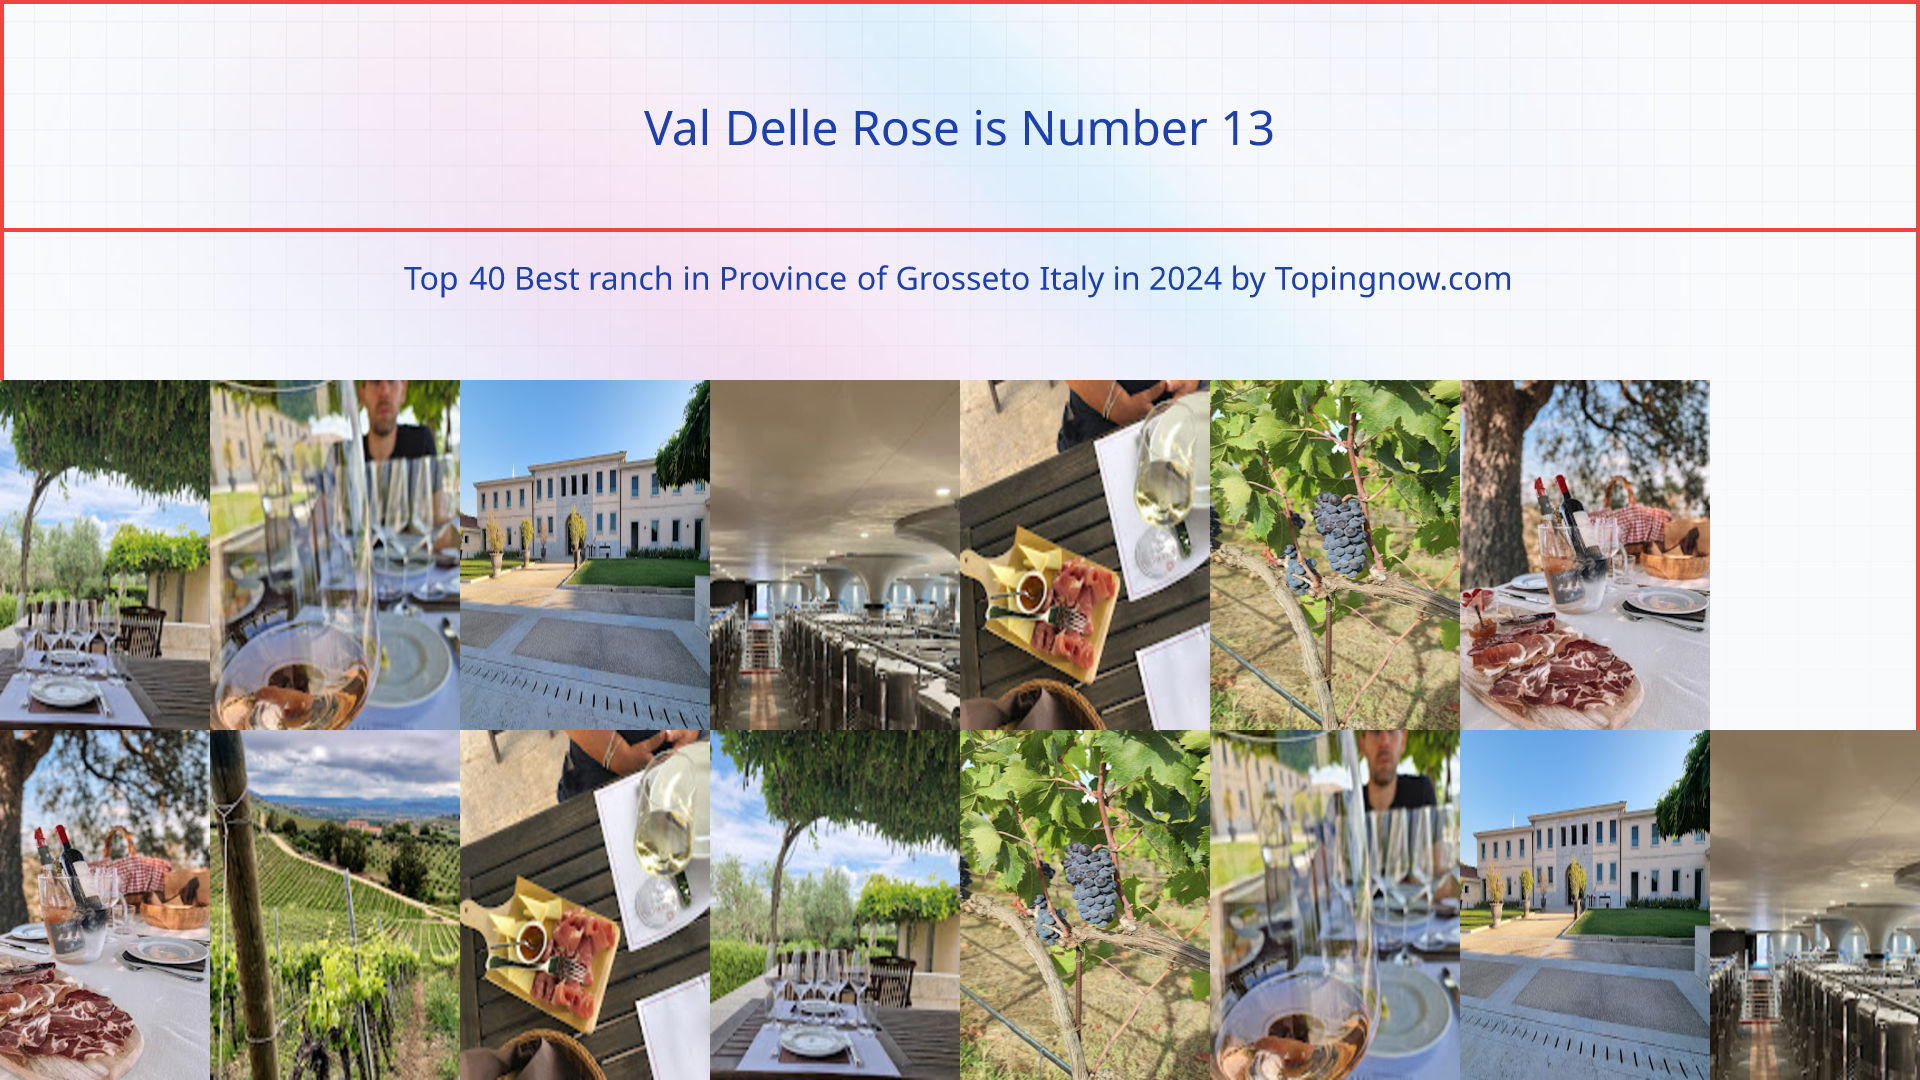 Val Delle Rose: Top 40 Best ranch in Province of Grosseto Italy in 2024